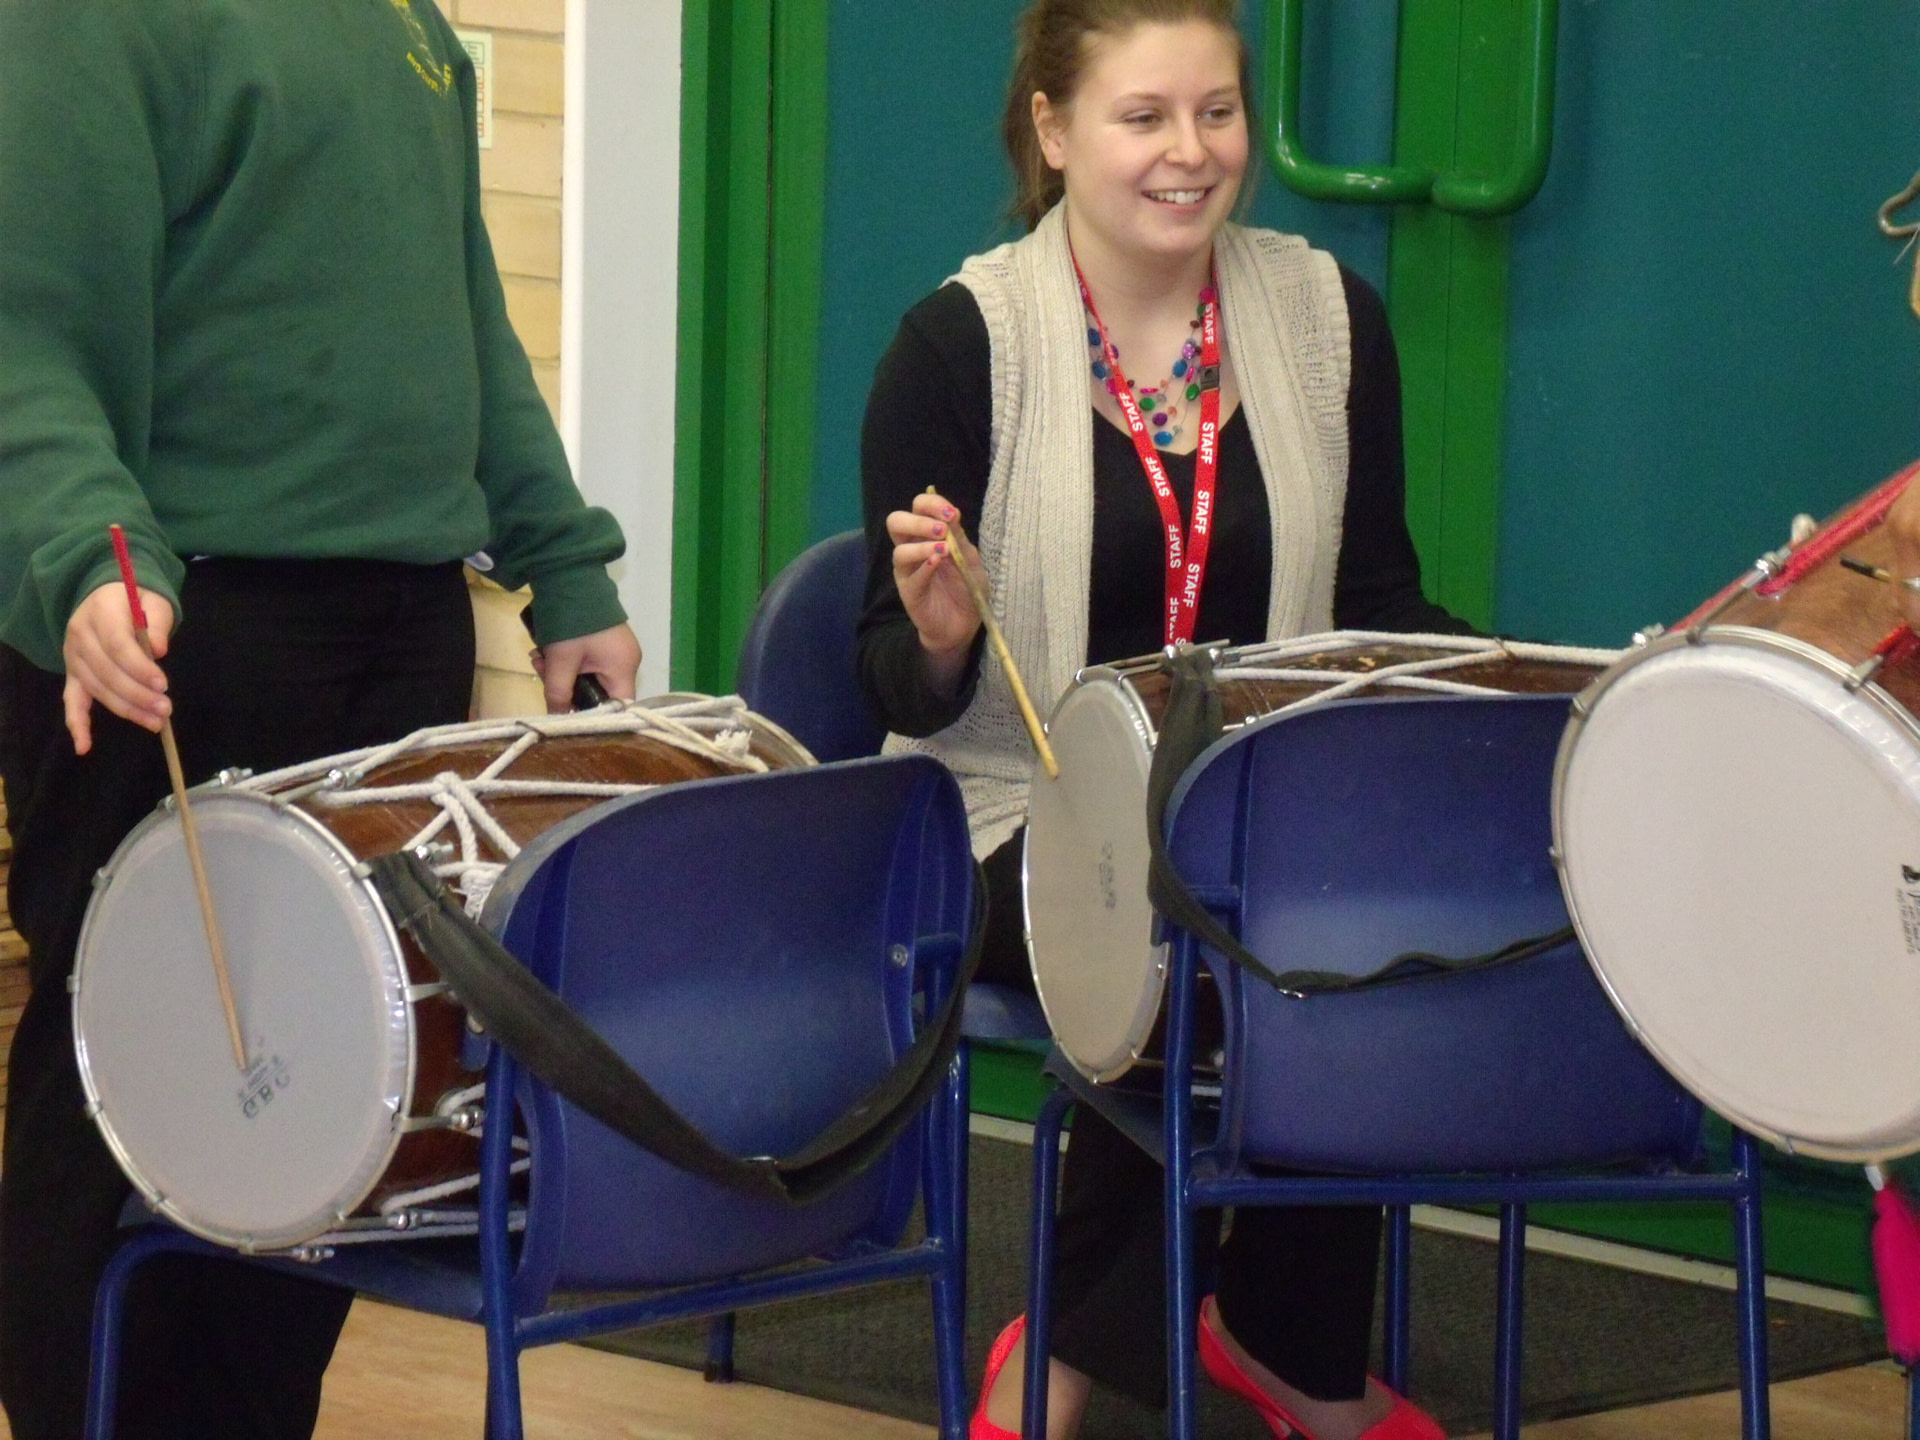 Teacher learning how to play indian drum in school hall on chair